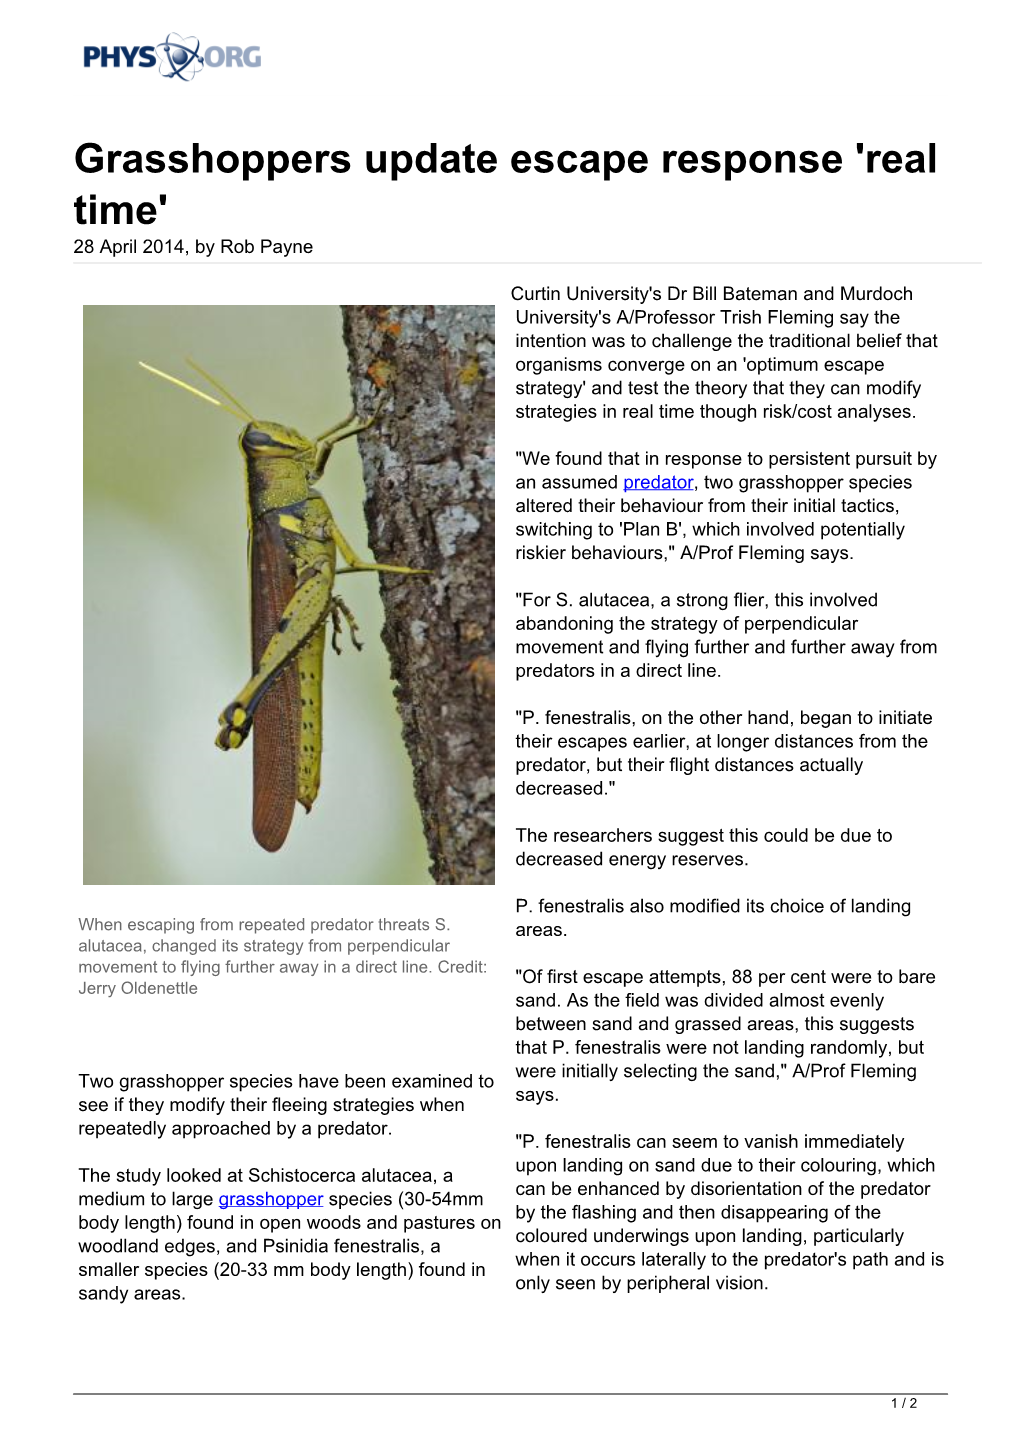 Grasshoppers Update Escape Response 'Real Time' 28 April 2014, by Rob Payne